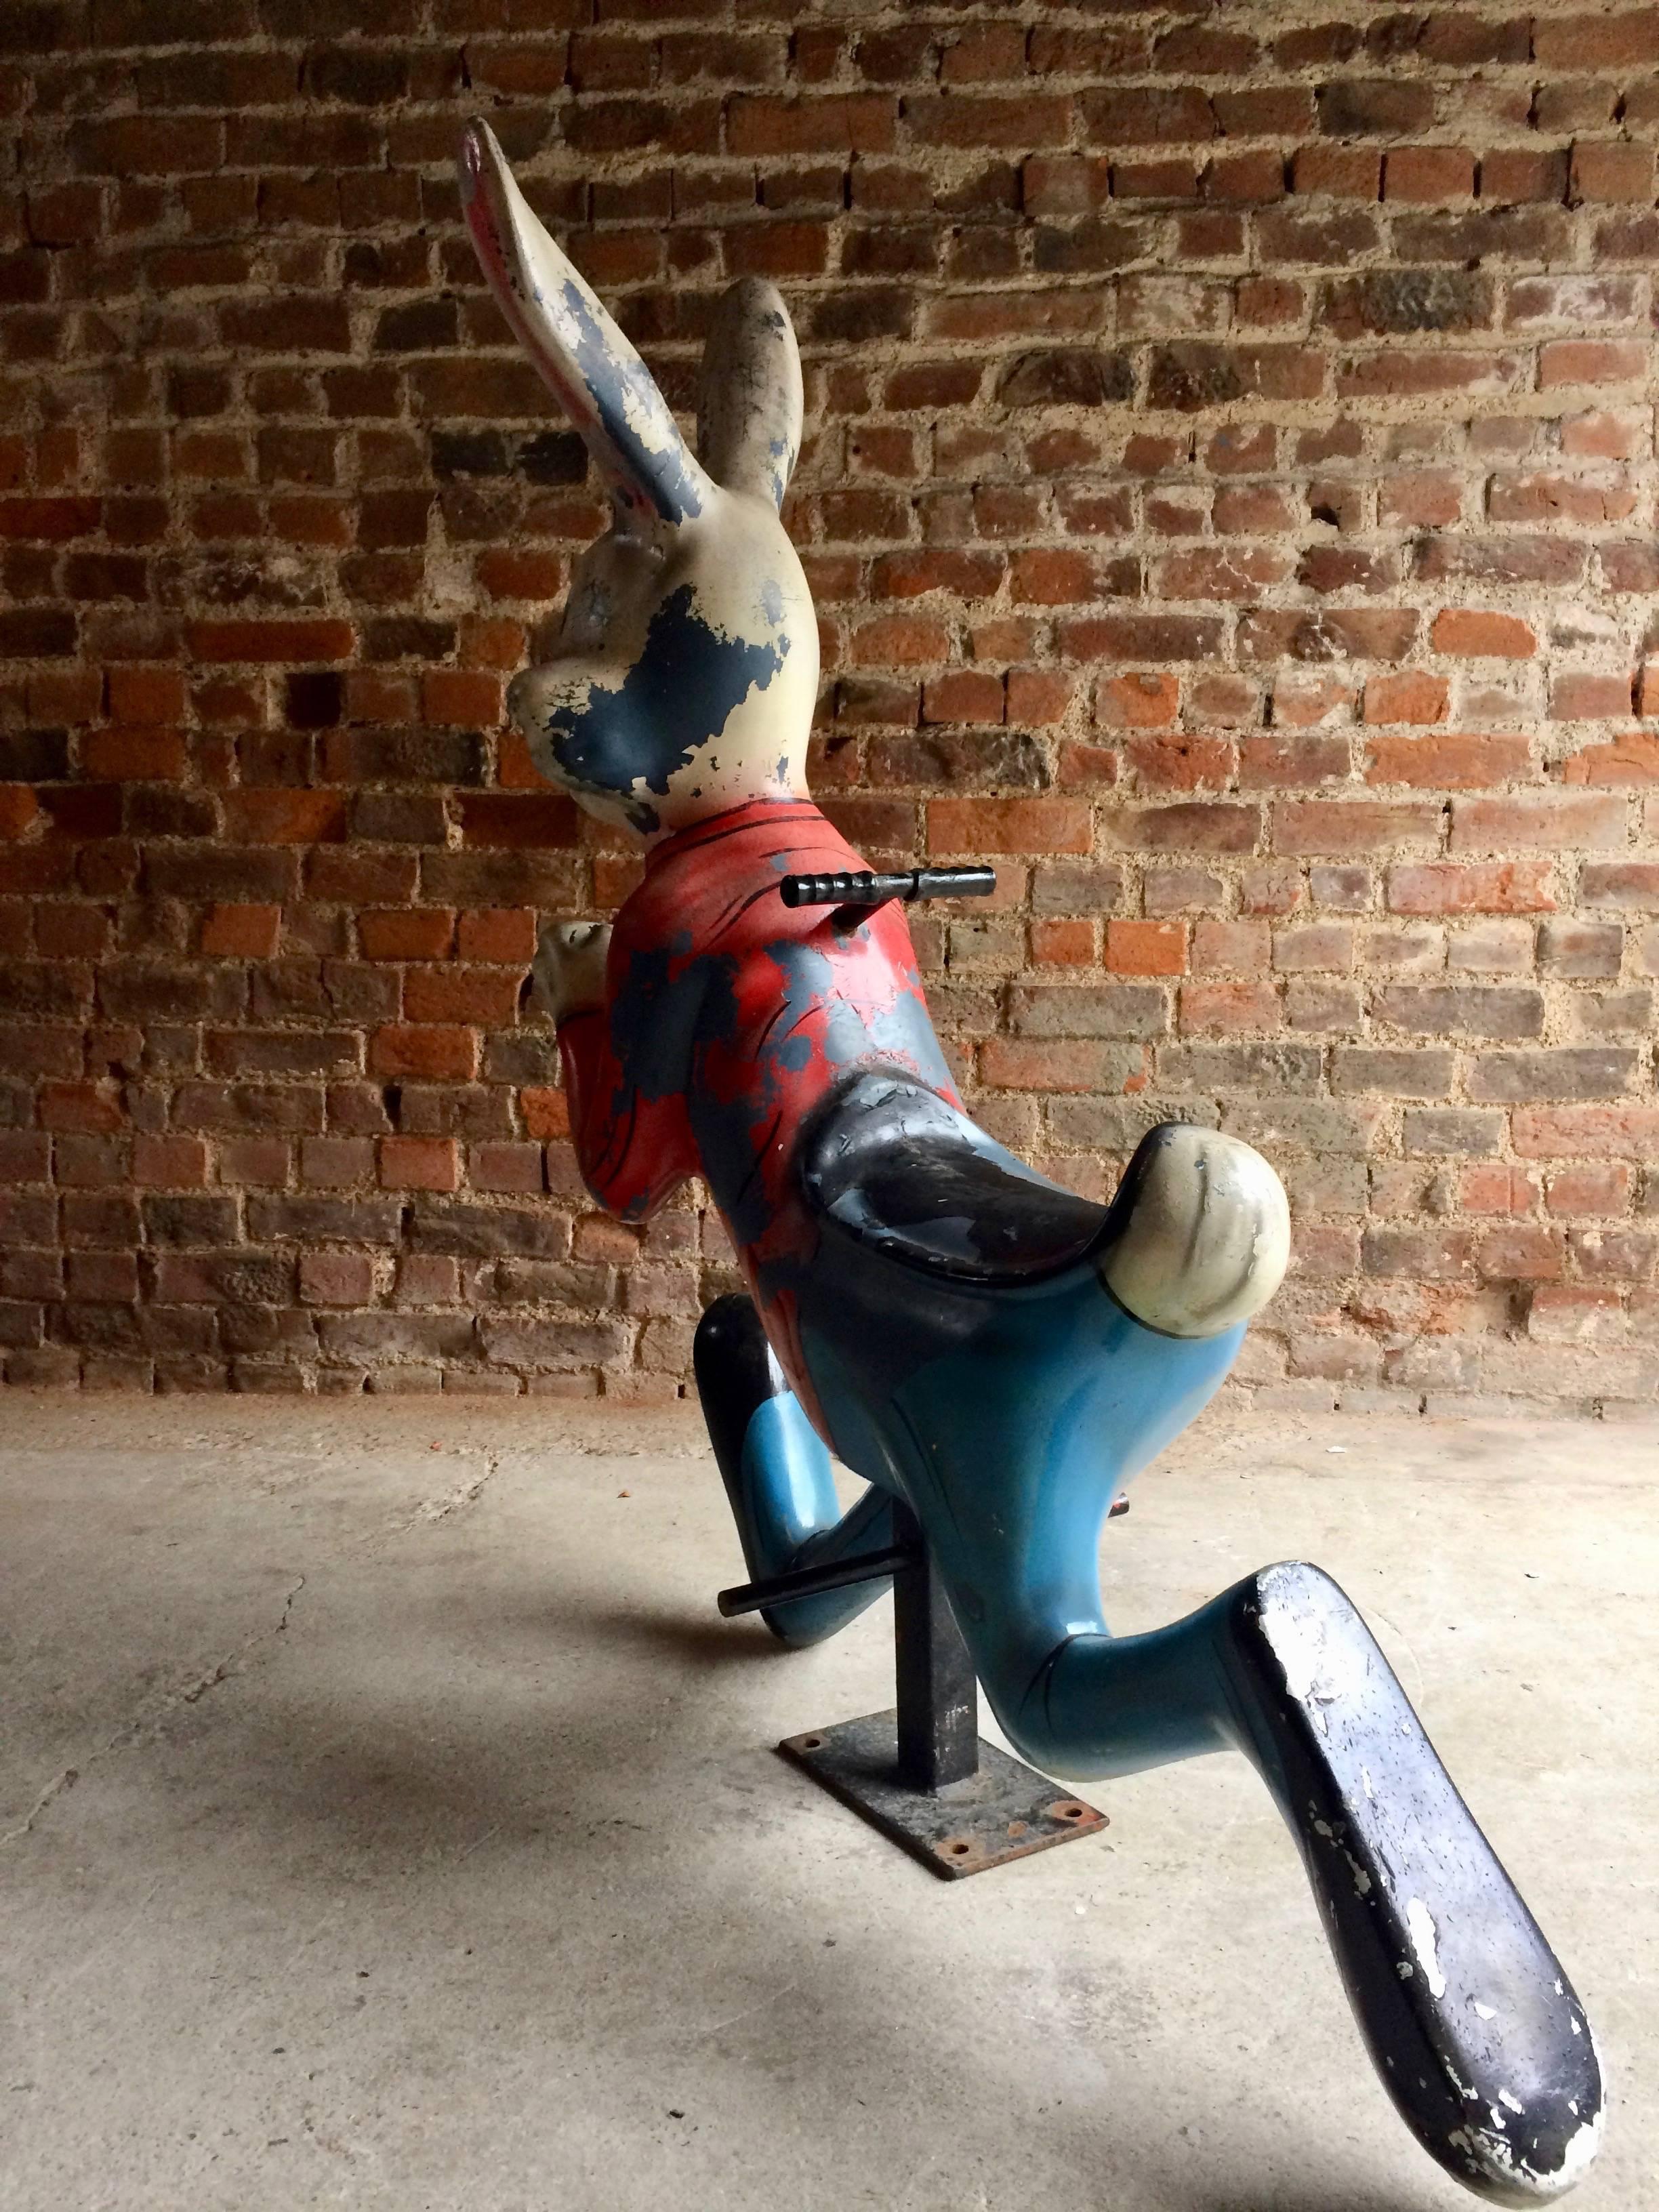 Vintage Fairground Ride Bunny Rabbit Reclaimed Distressed Loft Style In Distressed Condition In Longdon, Tewkesbury